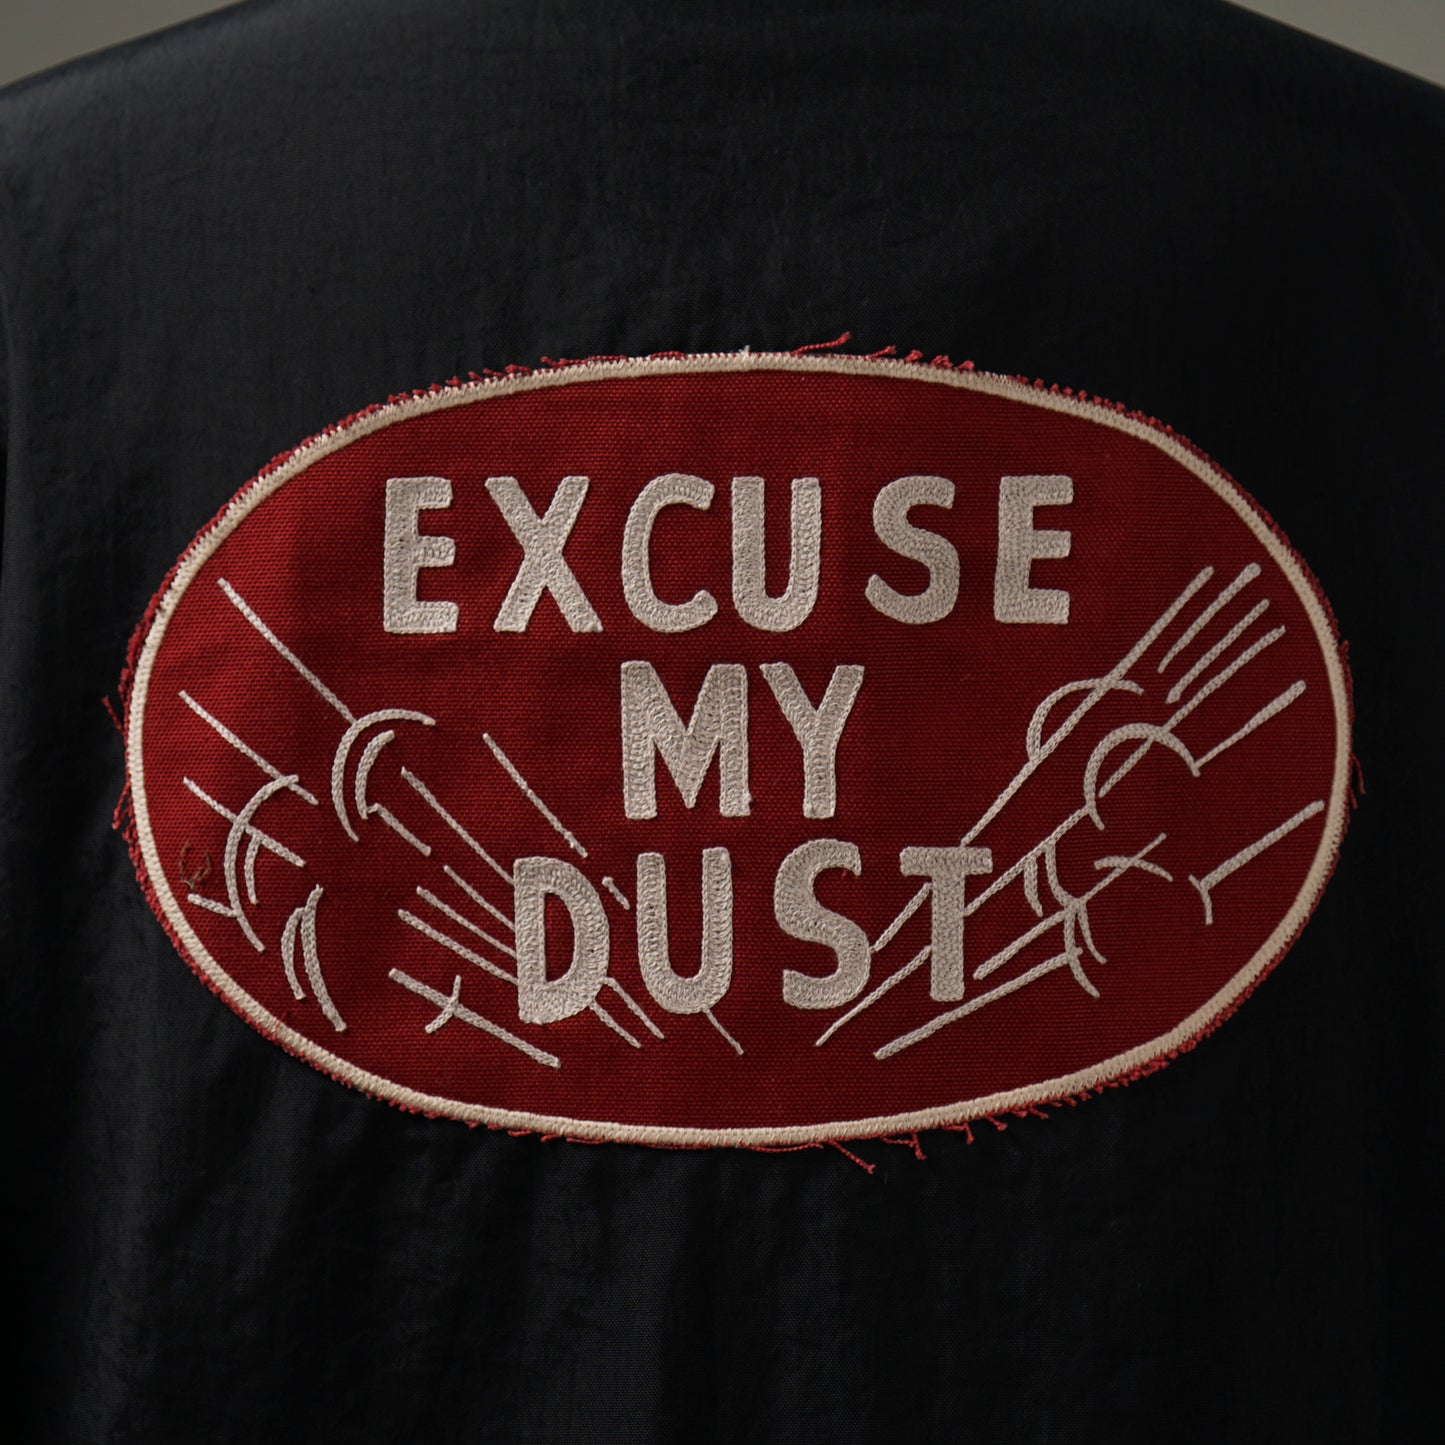 EXCUSE MY DUST - RACING JACKET / WRD-24-SS-01